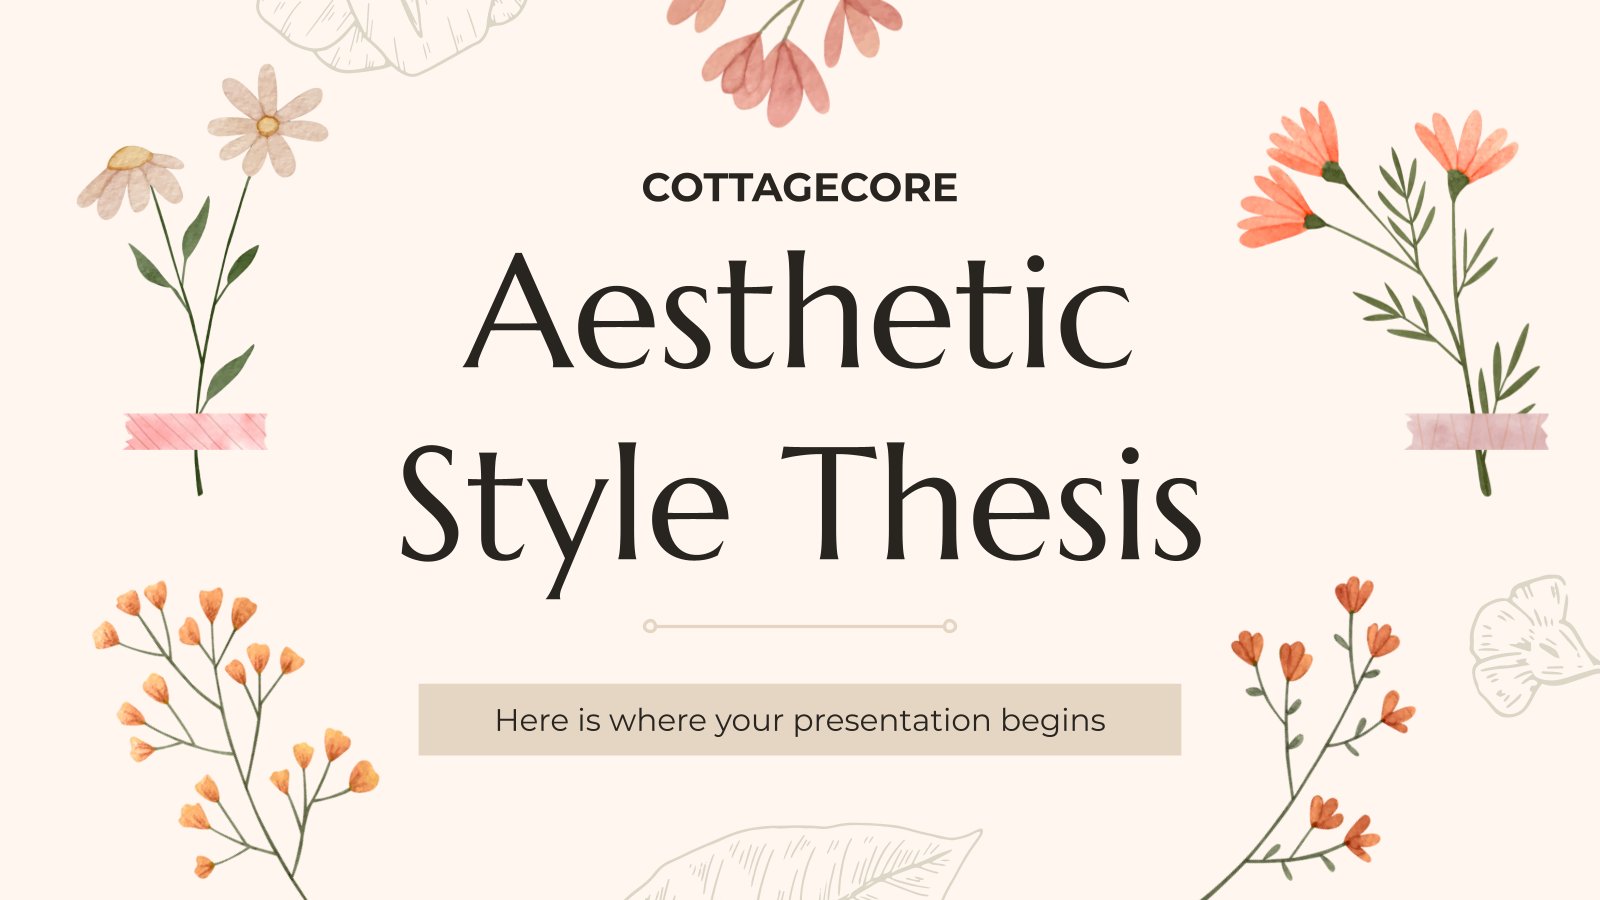 Cottagecore Aesthetic Style Thesis presentation template 